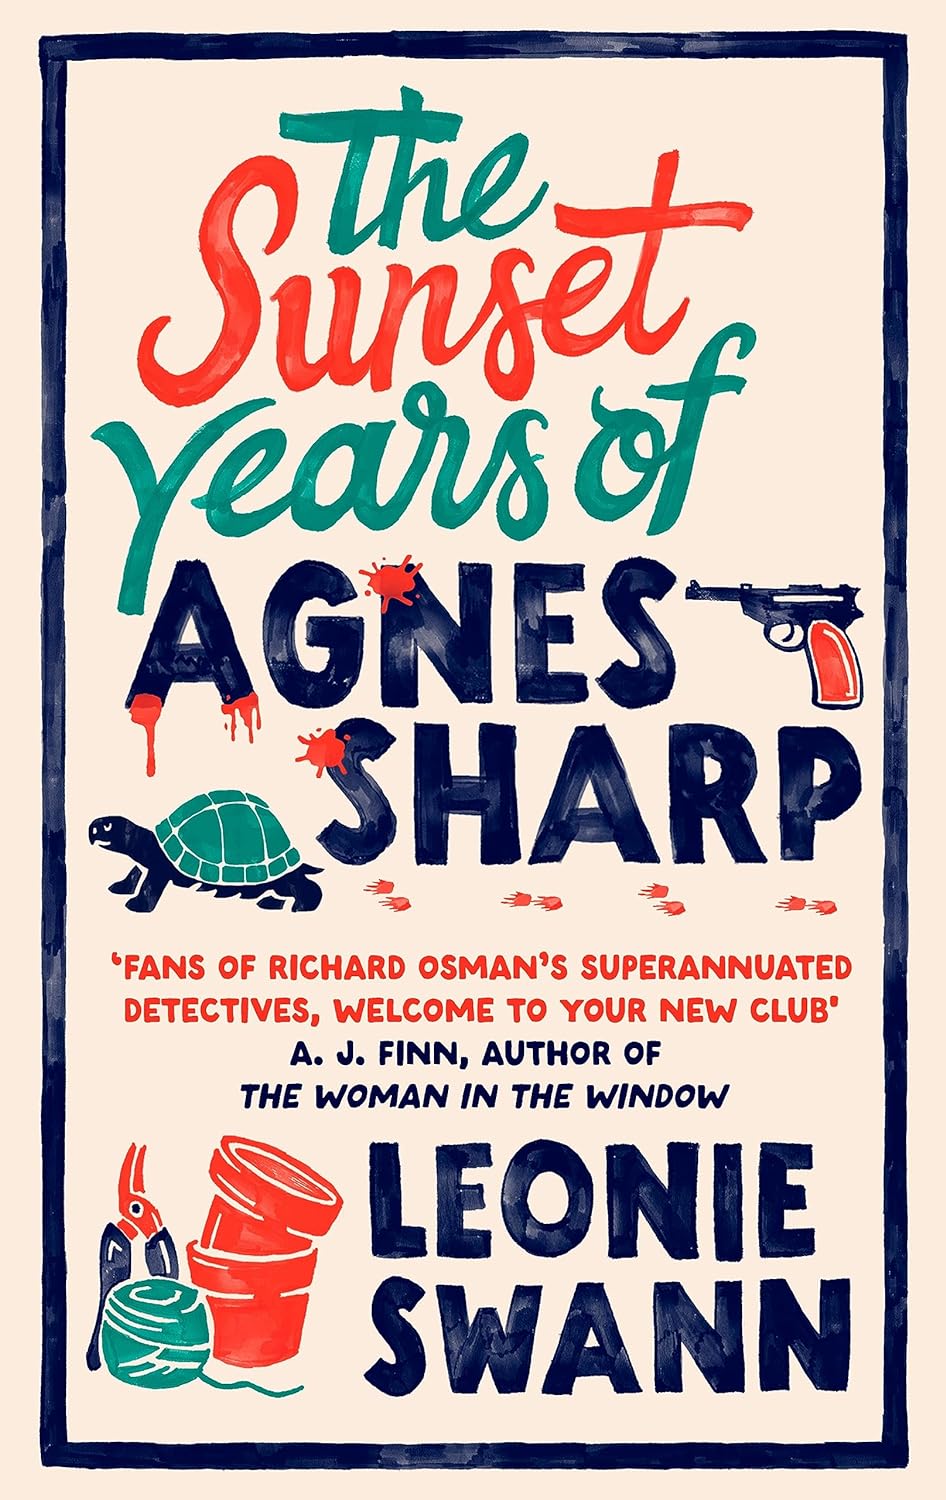 The_Sunset_years_of_agnes_sharp_book_cover